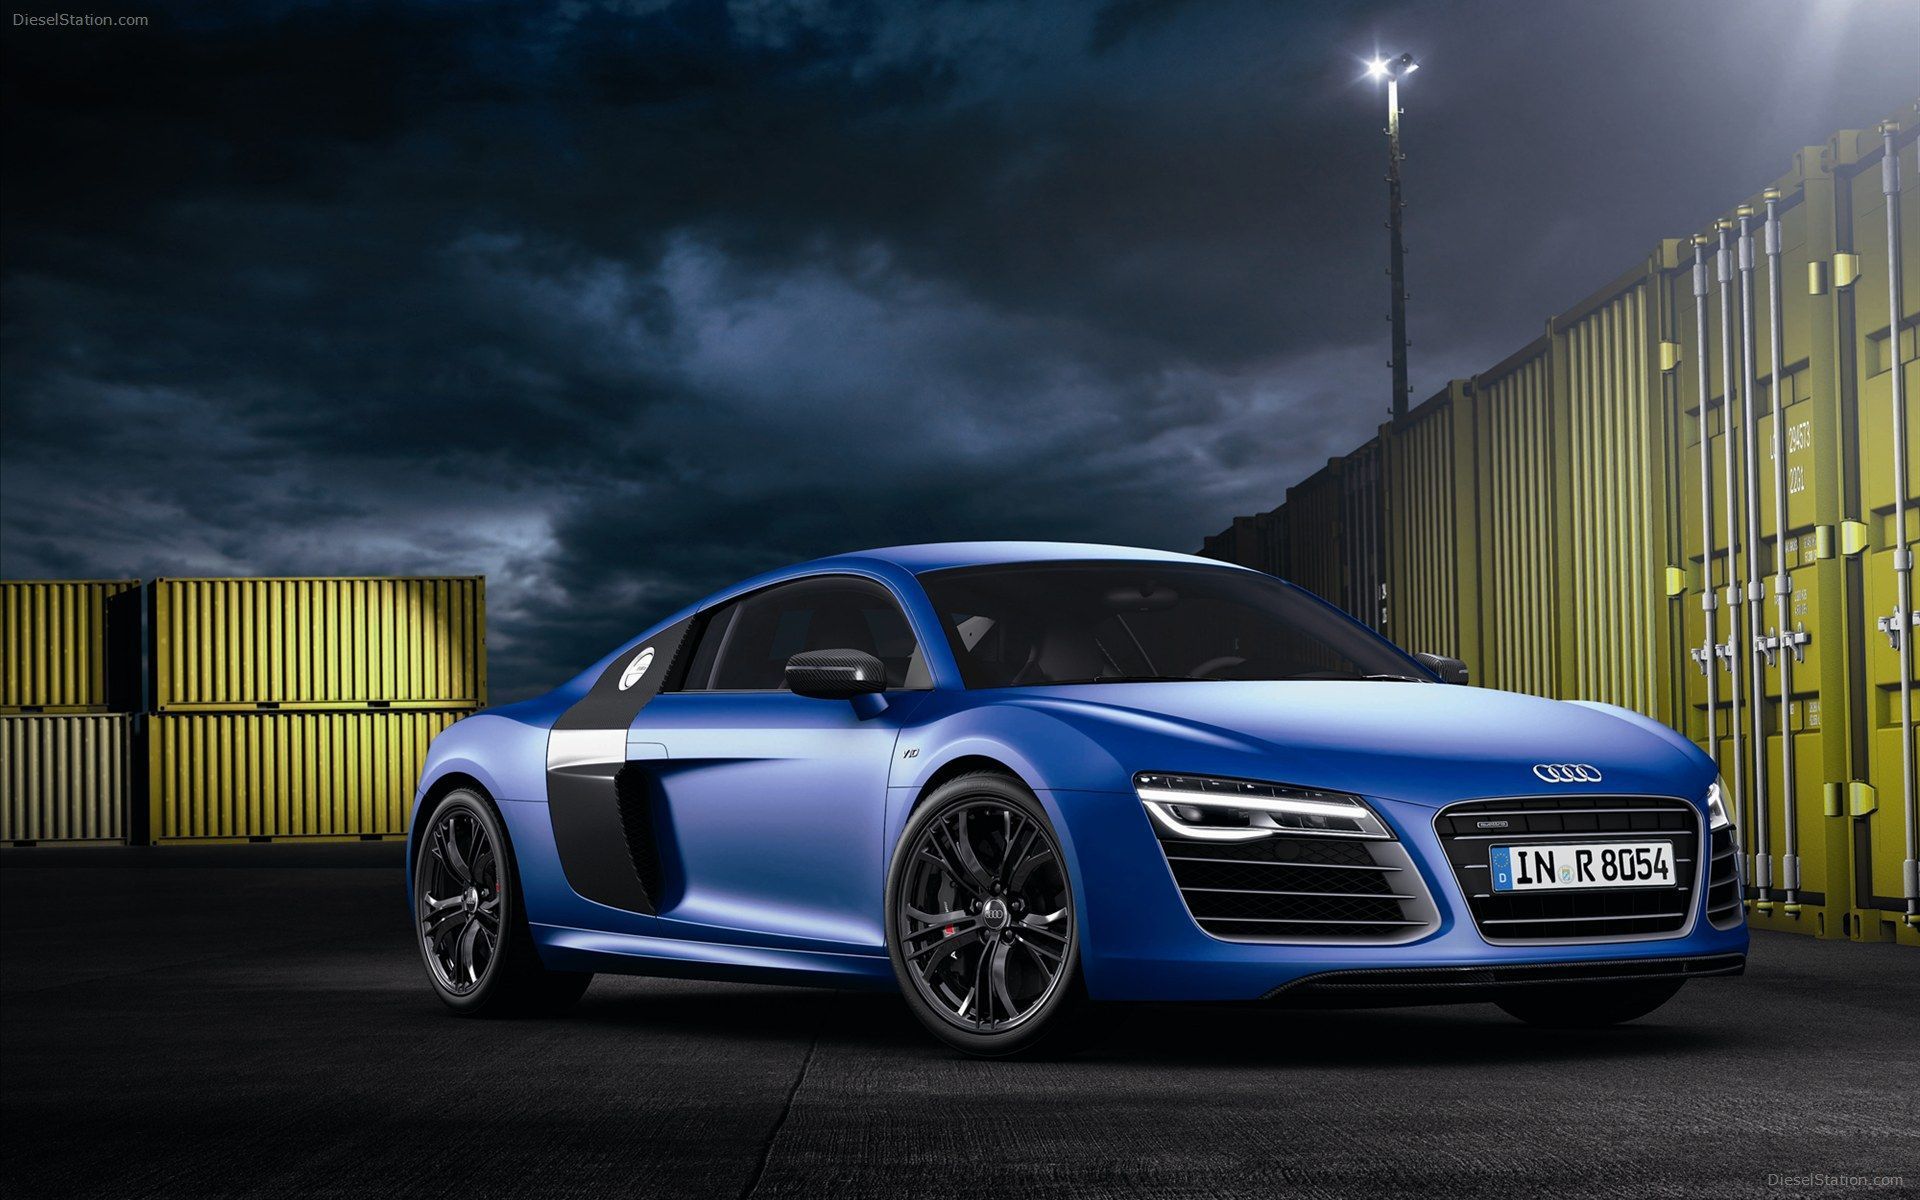 Download Stunning Audi R8 Top View Free Image Full Size